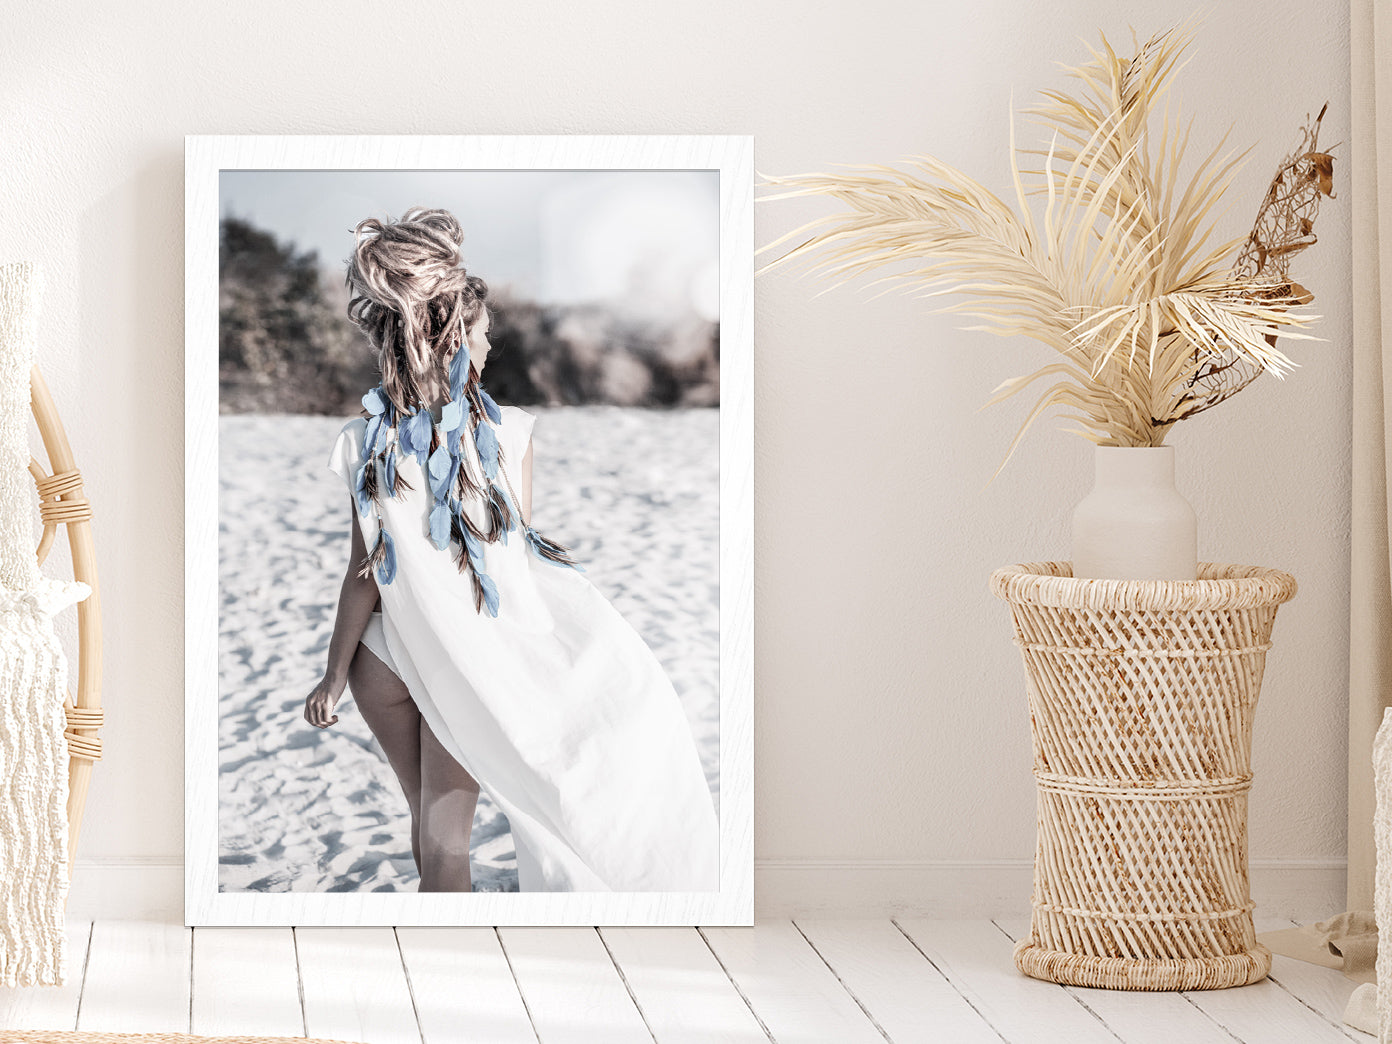 Girl on Sand Beach View Photograph Glass Framed Wall Art, Ready to Hang Quality Print Without White Border White